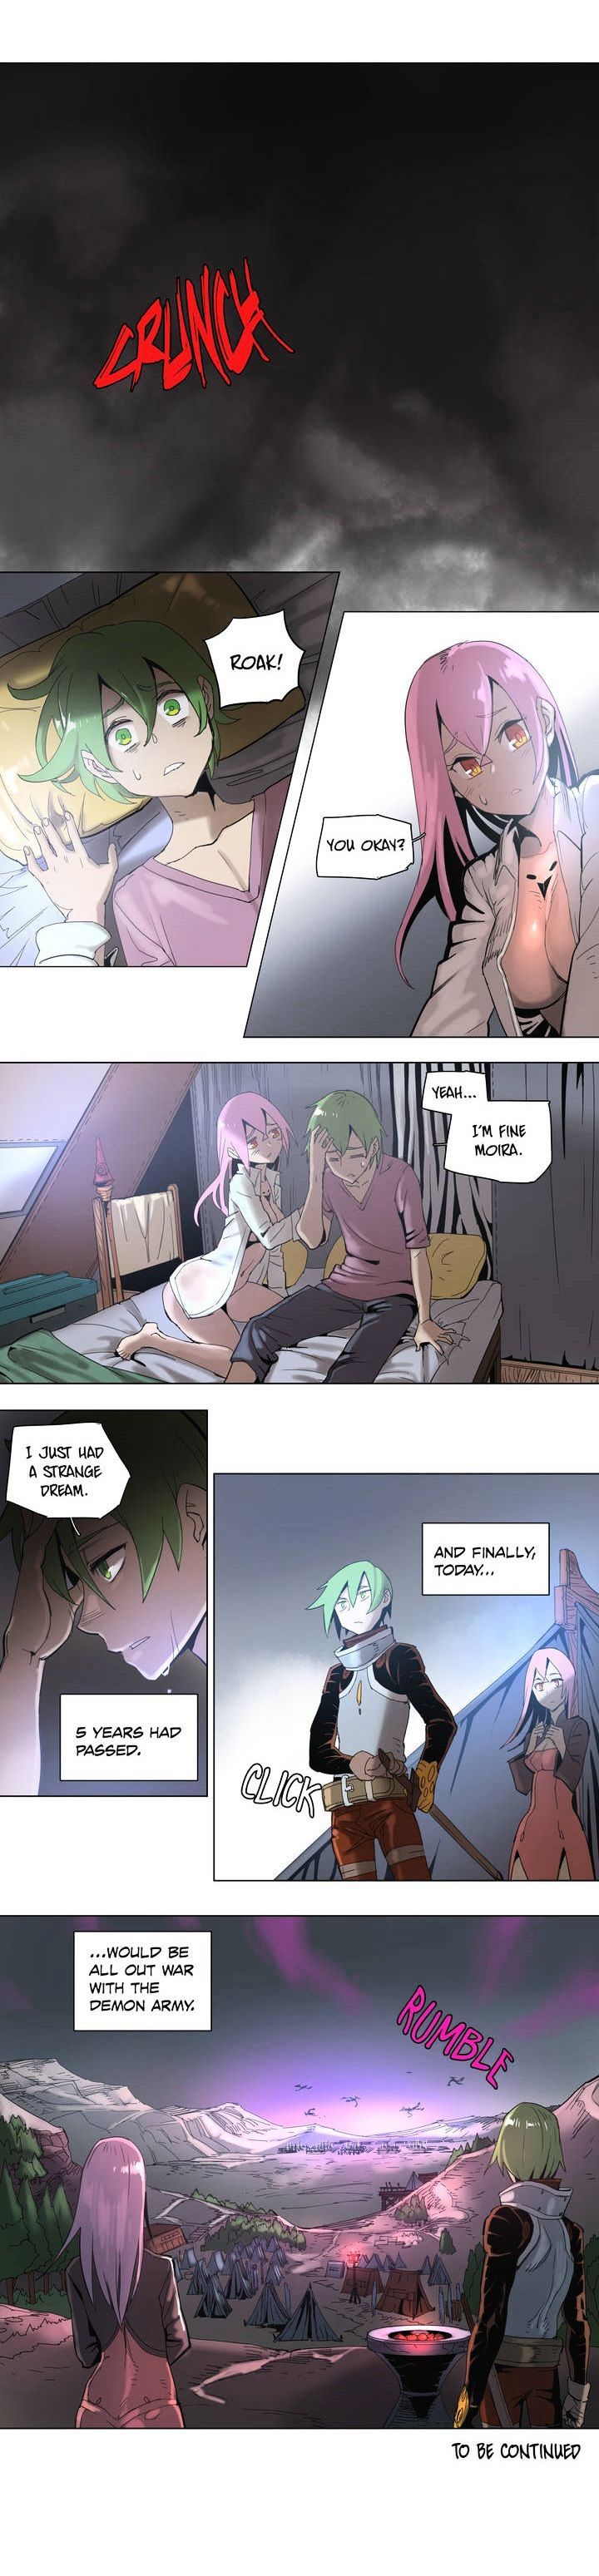 4 Cut Hero Chapter 52 page 15